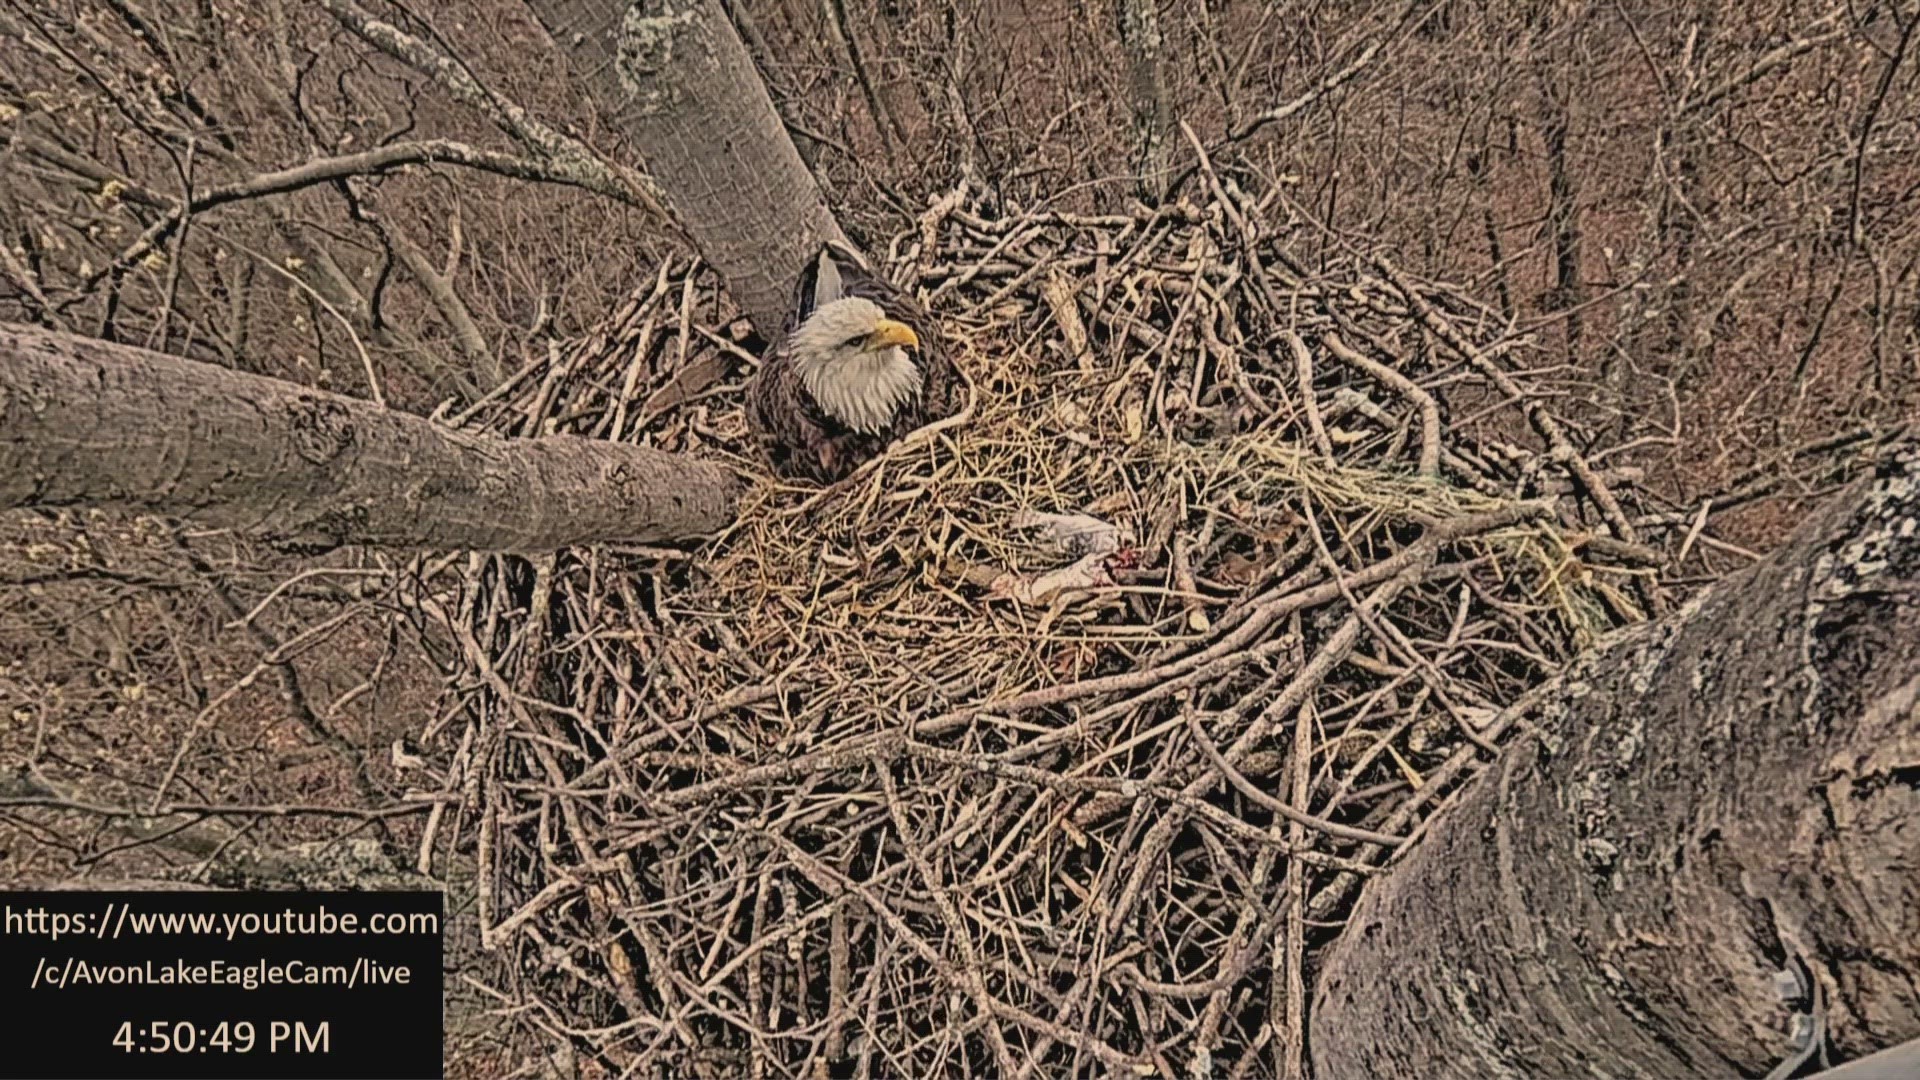 The bald eagle parents, Stars and Stripes, have had a nest at Avon Lake's Redwood Elementary School since 2014. There is still another egg waiting to be hatched.